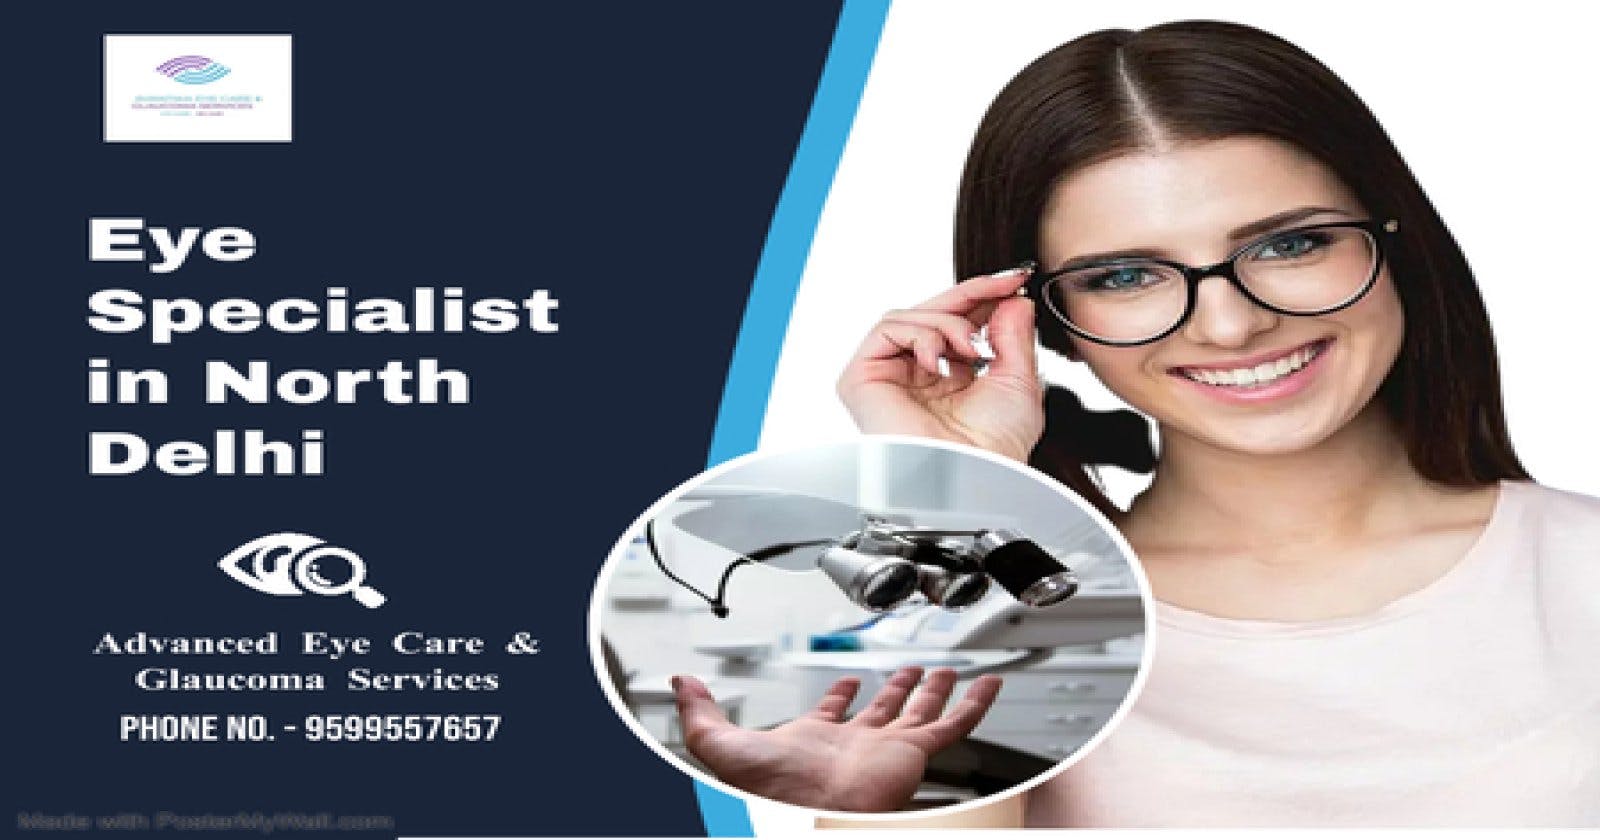 Eyesight Solutions: Dr. Neha Midha Your Trusted Eye Specialist in North Delhi & Cataract Surgery in Pitampura